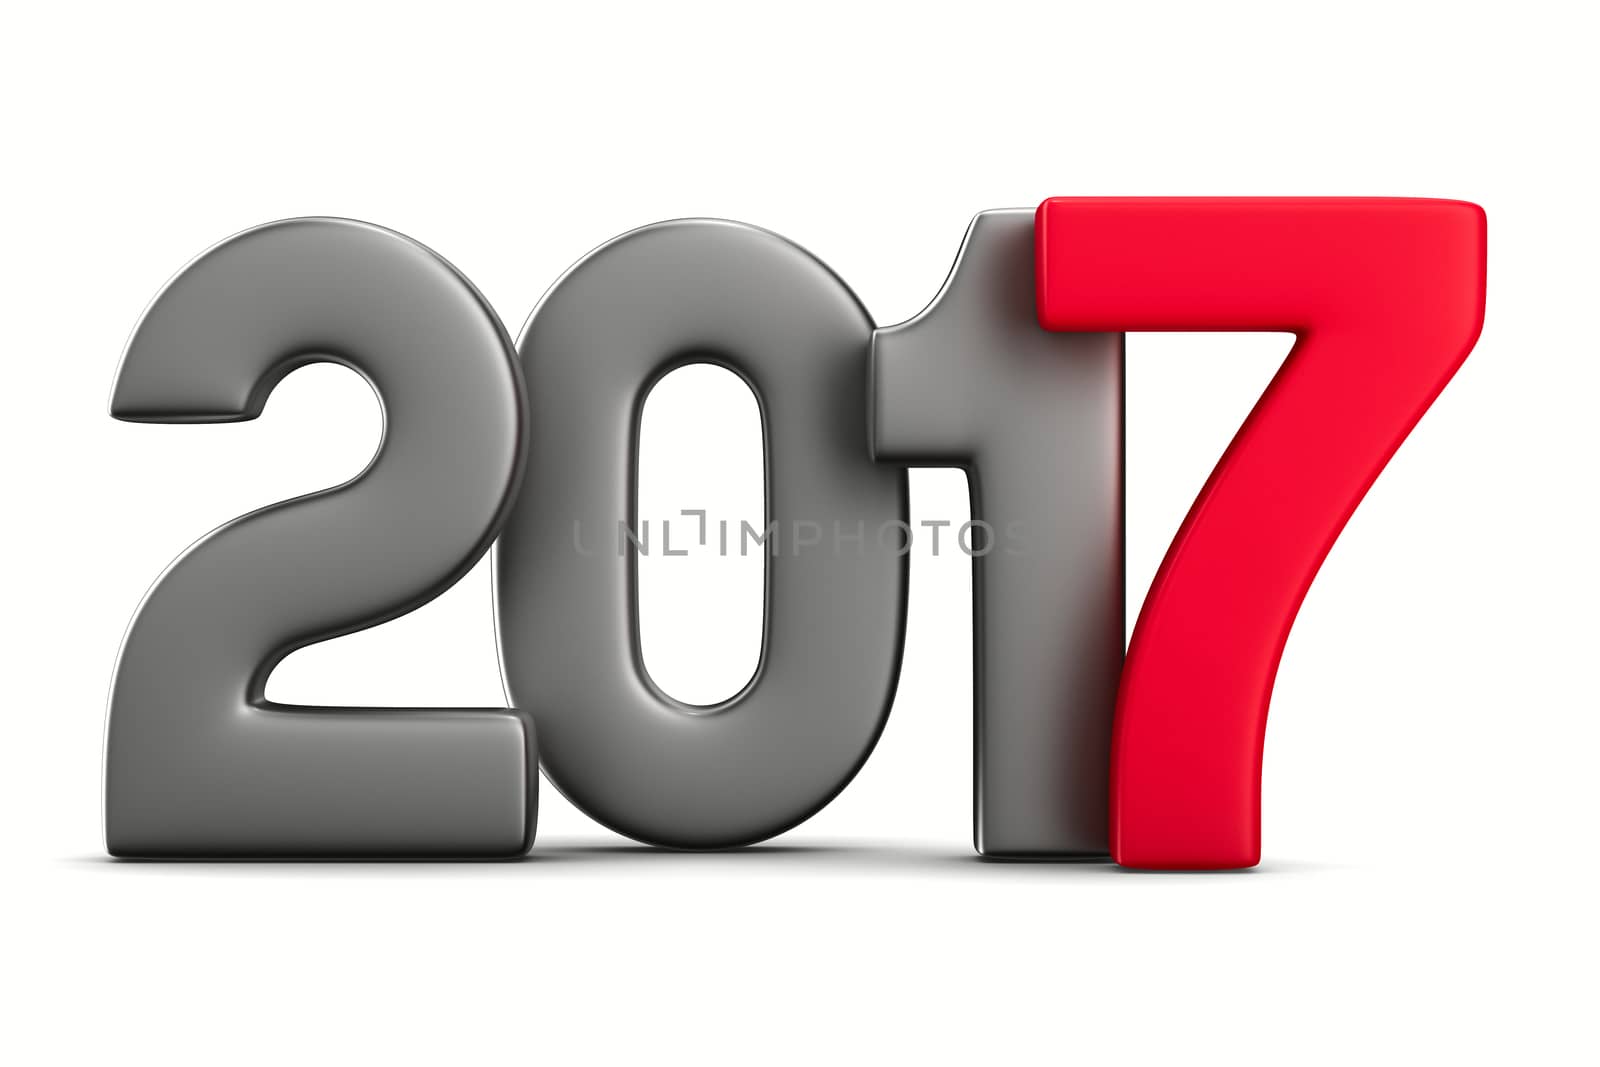 2017 new year. Isolated 3D image by ISerg